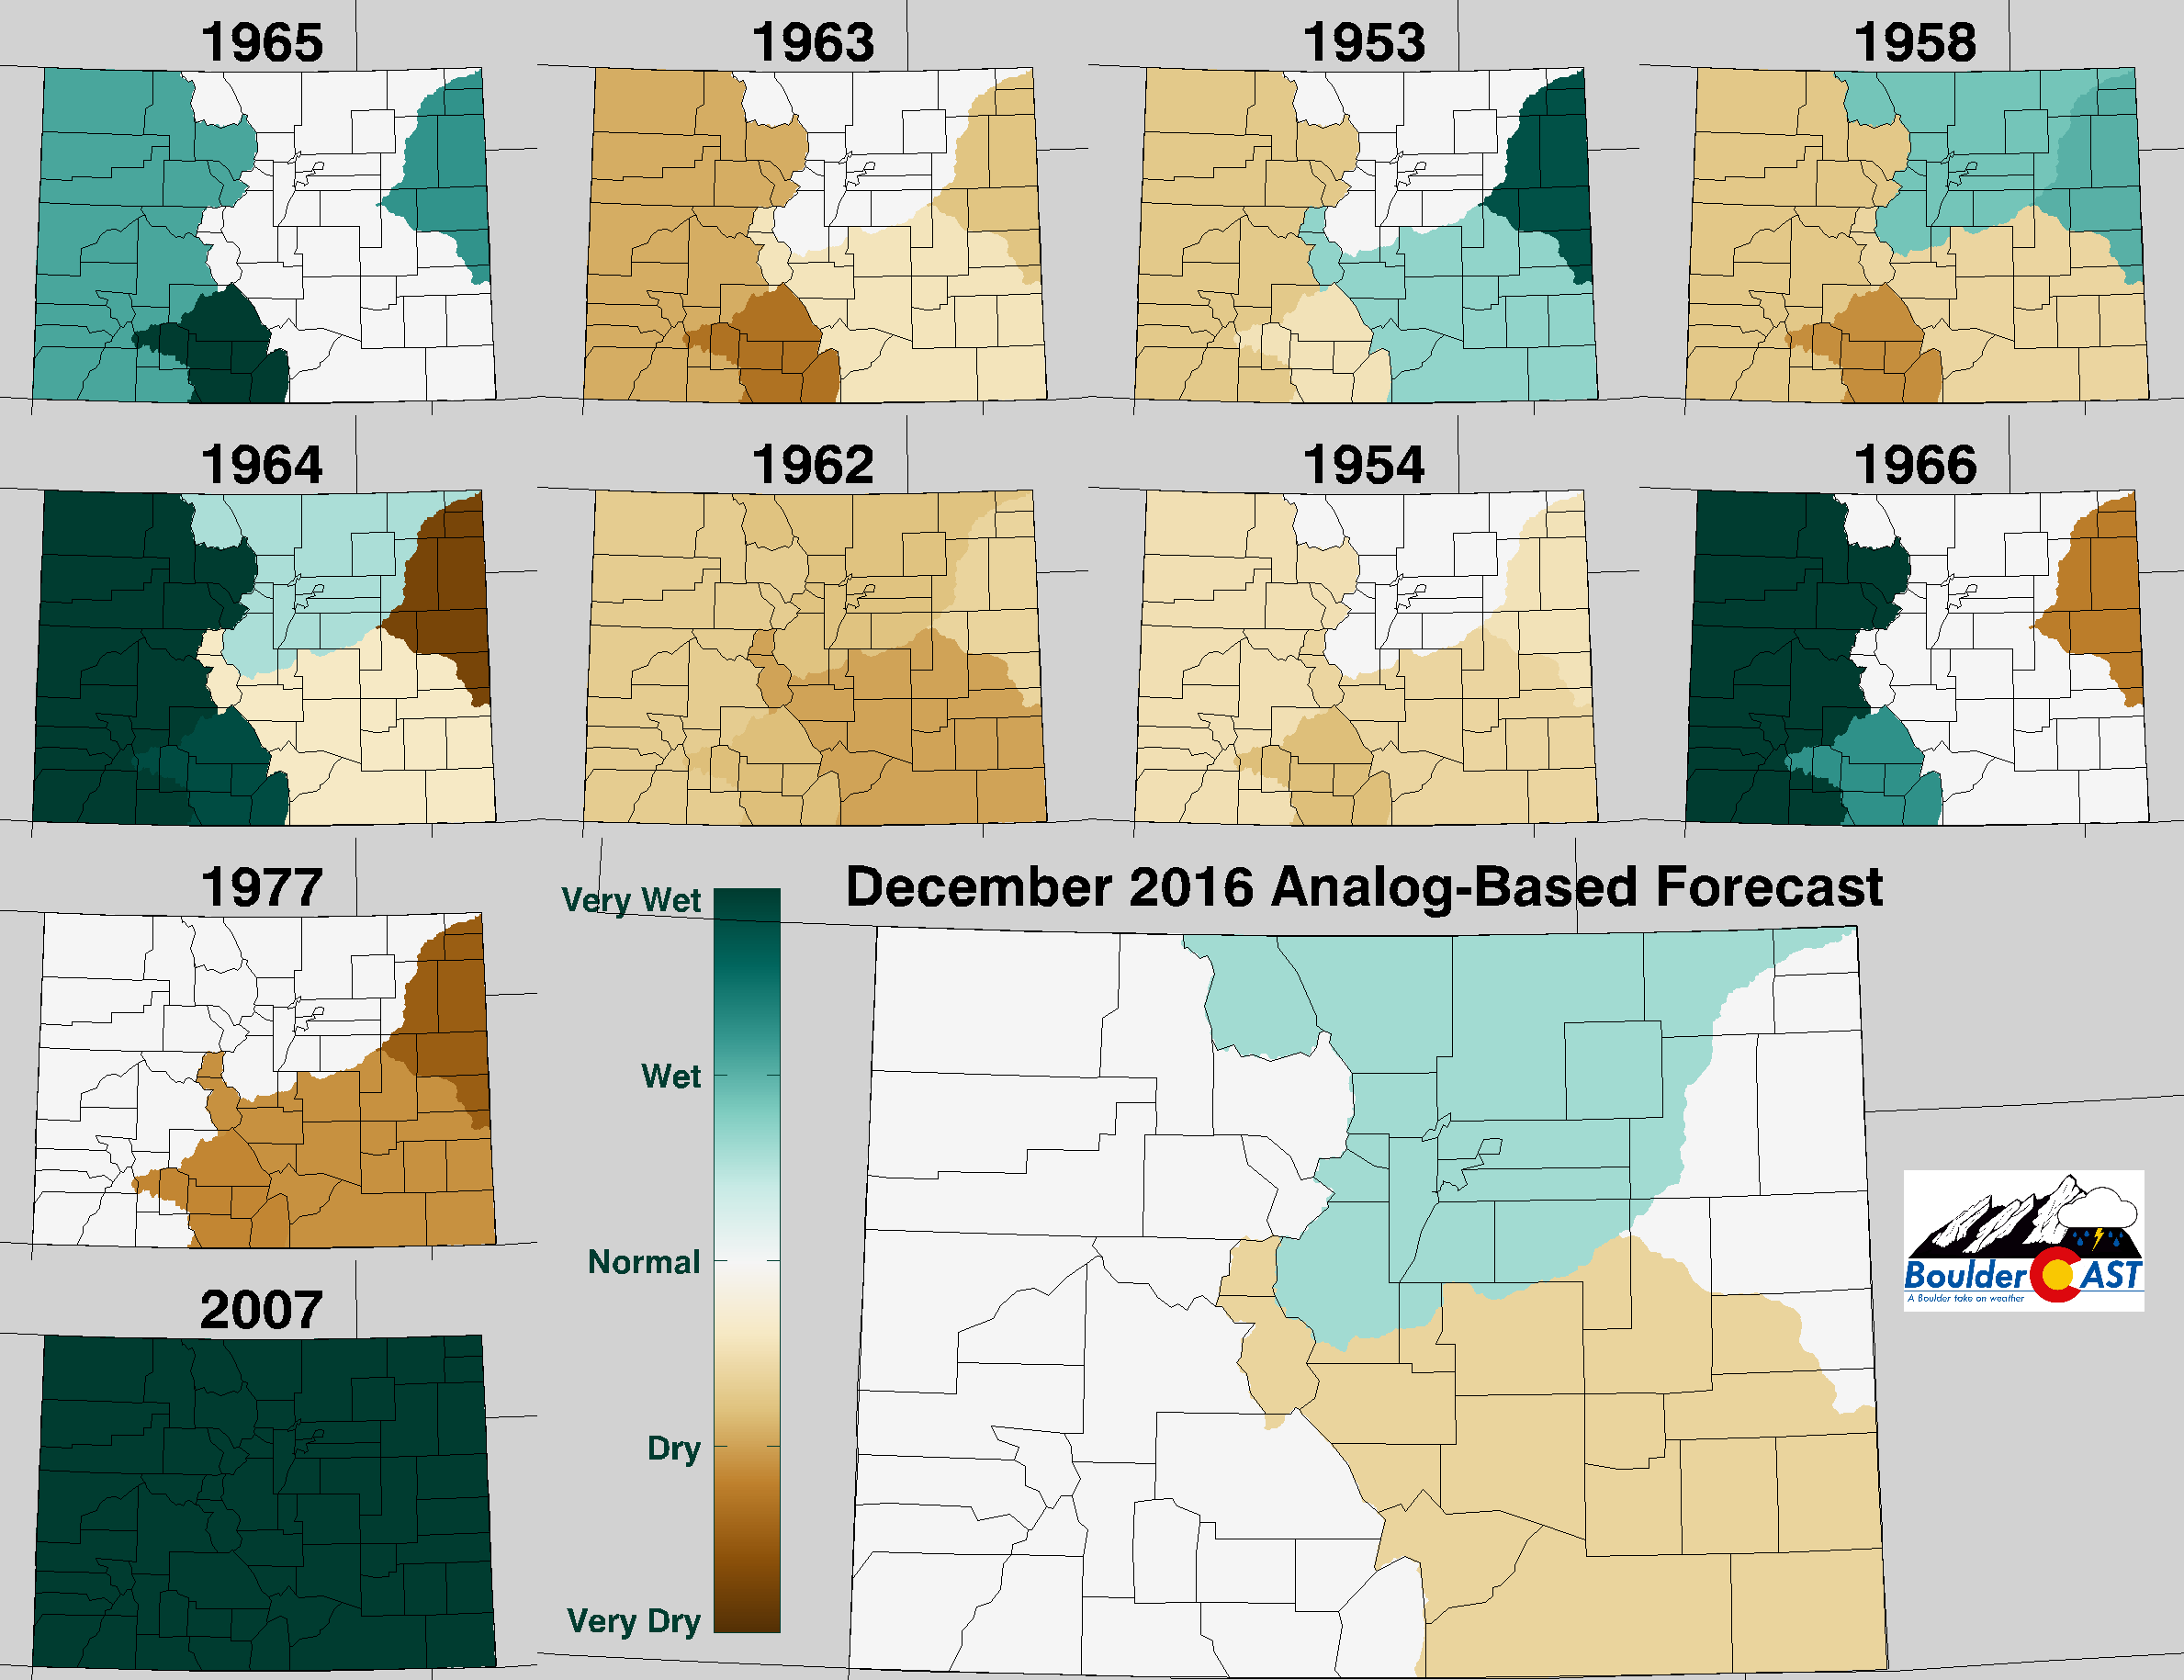 Top 10 Analogs to 2016 and how those years played for PRECIPITATION in Colorado during the month of December. The large map shows the analog-based weighted consensus forecast based on those 10 years.